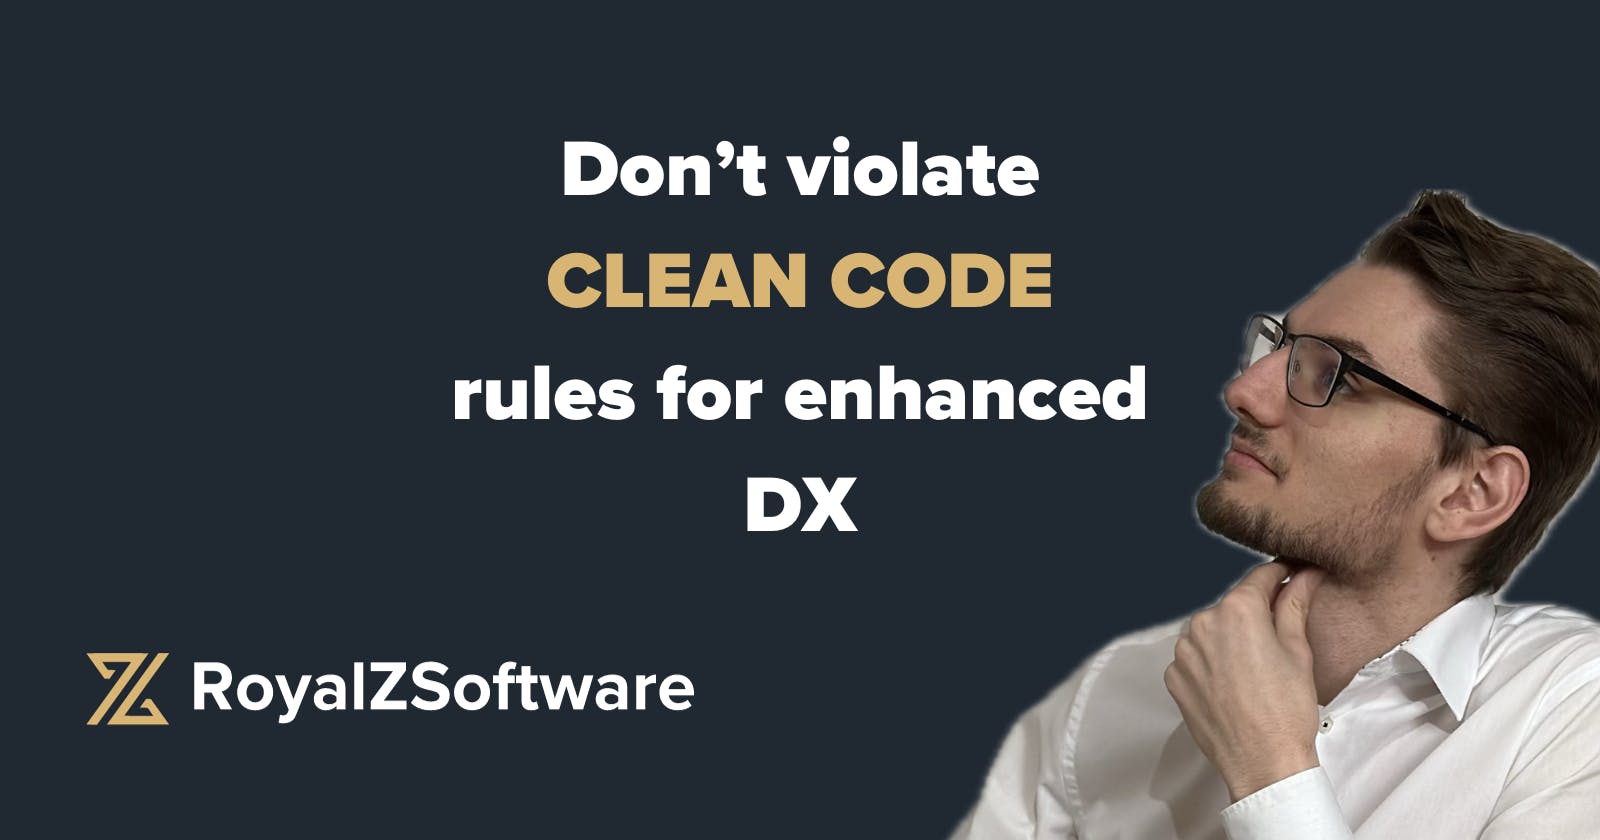 Don't violate clean code rules for enhanced DX